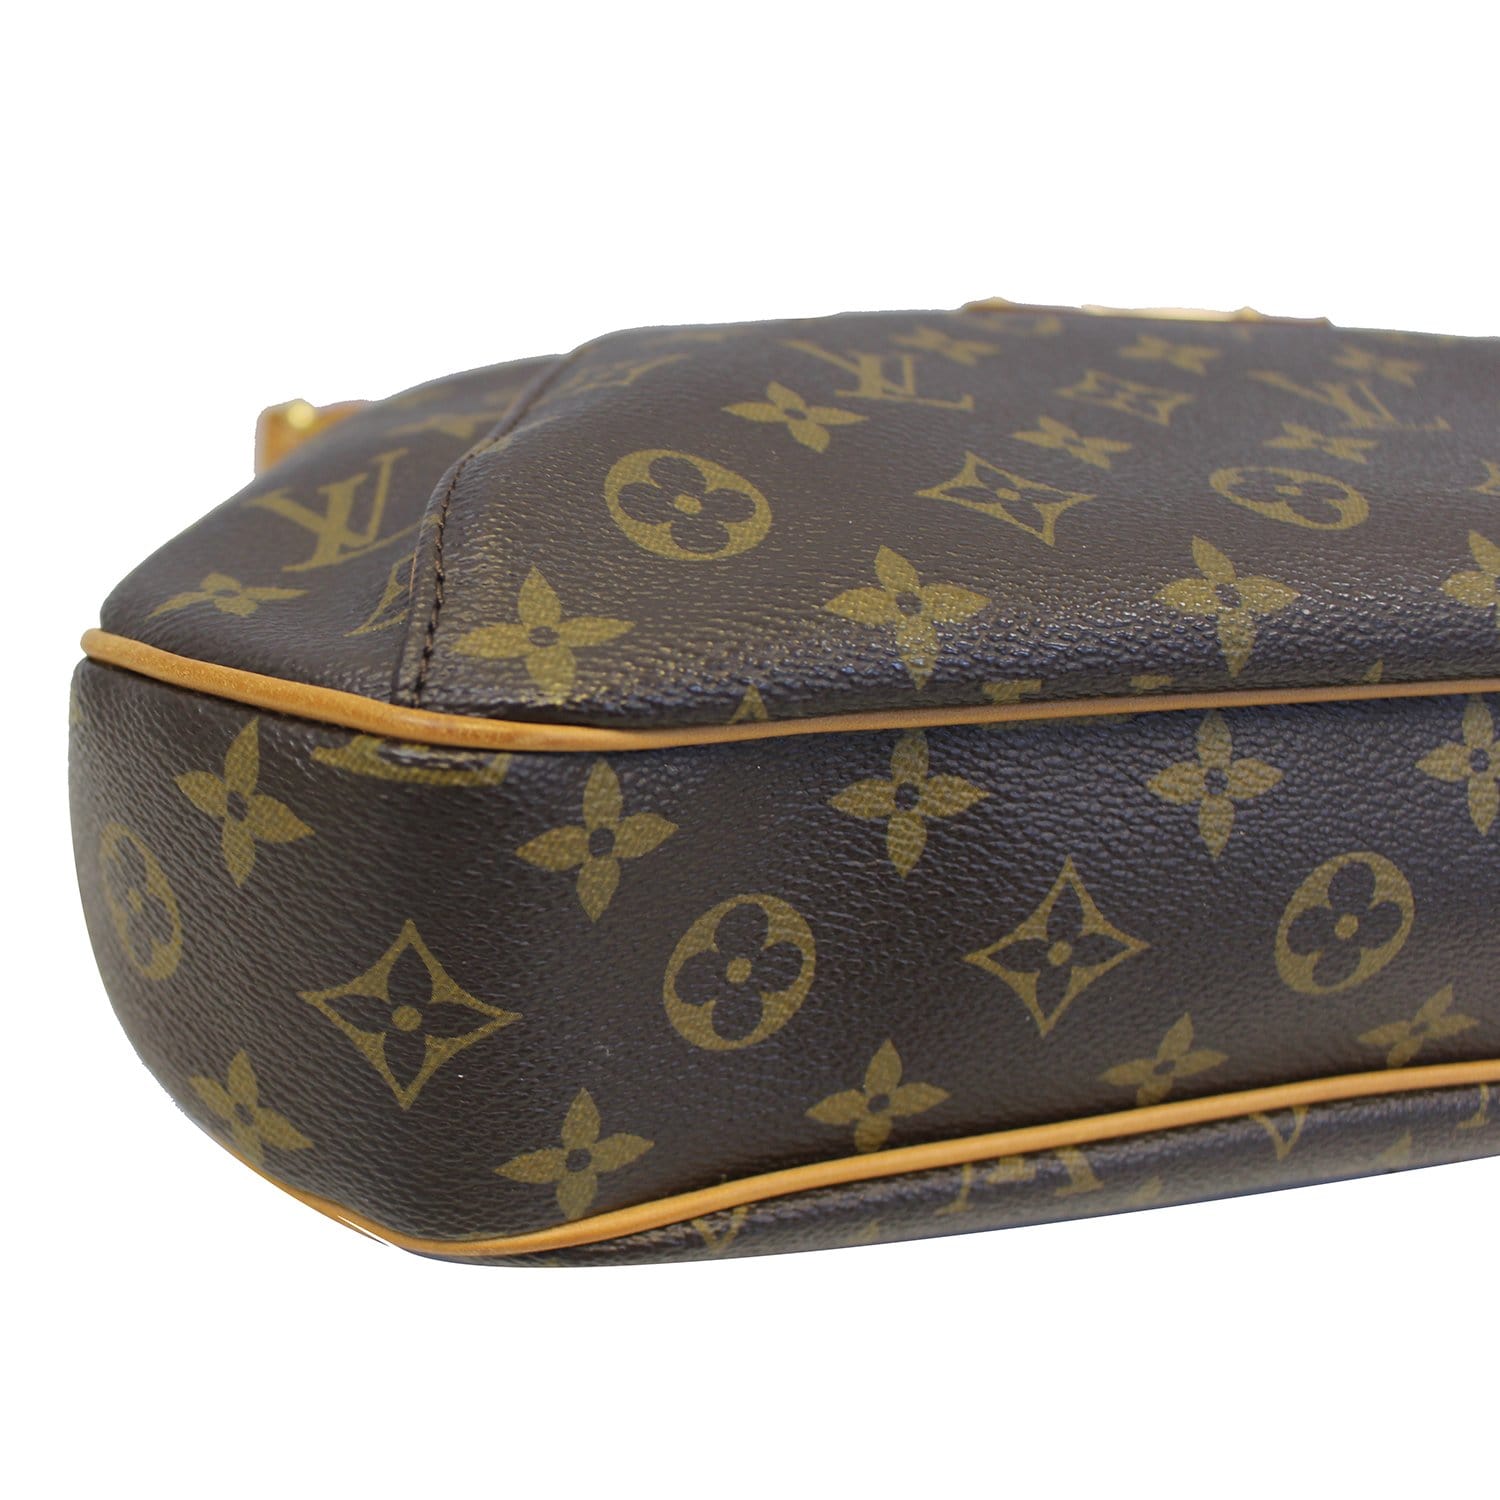 Louis Vuitton Thames - 4 For Sale on 1stDibs  louis vuitton thames pm, louis  vuitton thames gm, lv thames